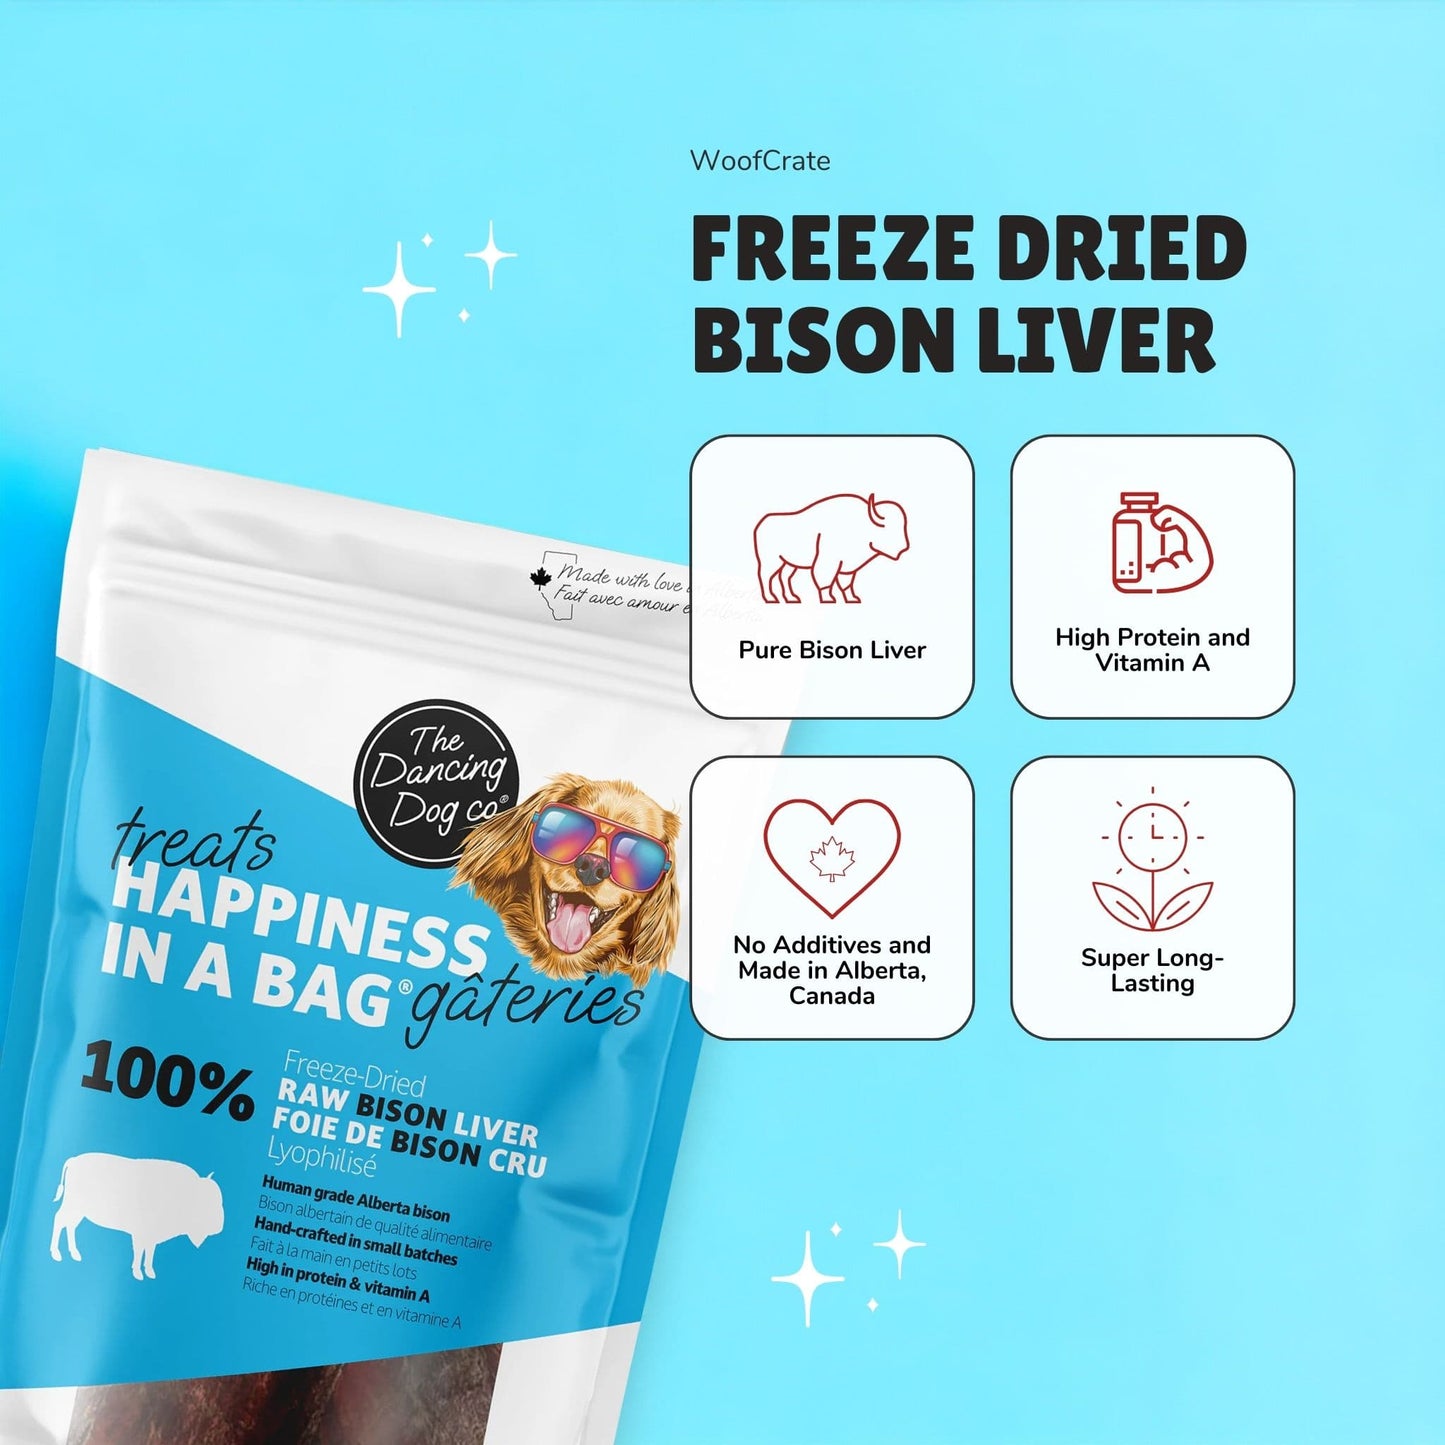 Benefits of freeze dried bison liver for dogs side by side with a bag of bison liver dog treats. The benefits include being high in protein, having no additives, being made in Canada, and are long lasting.